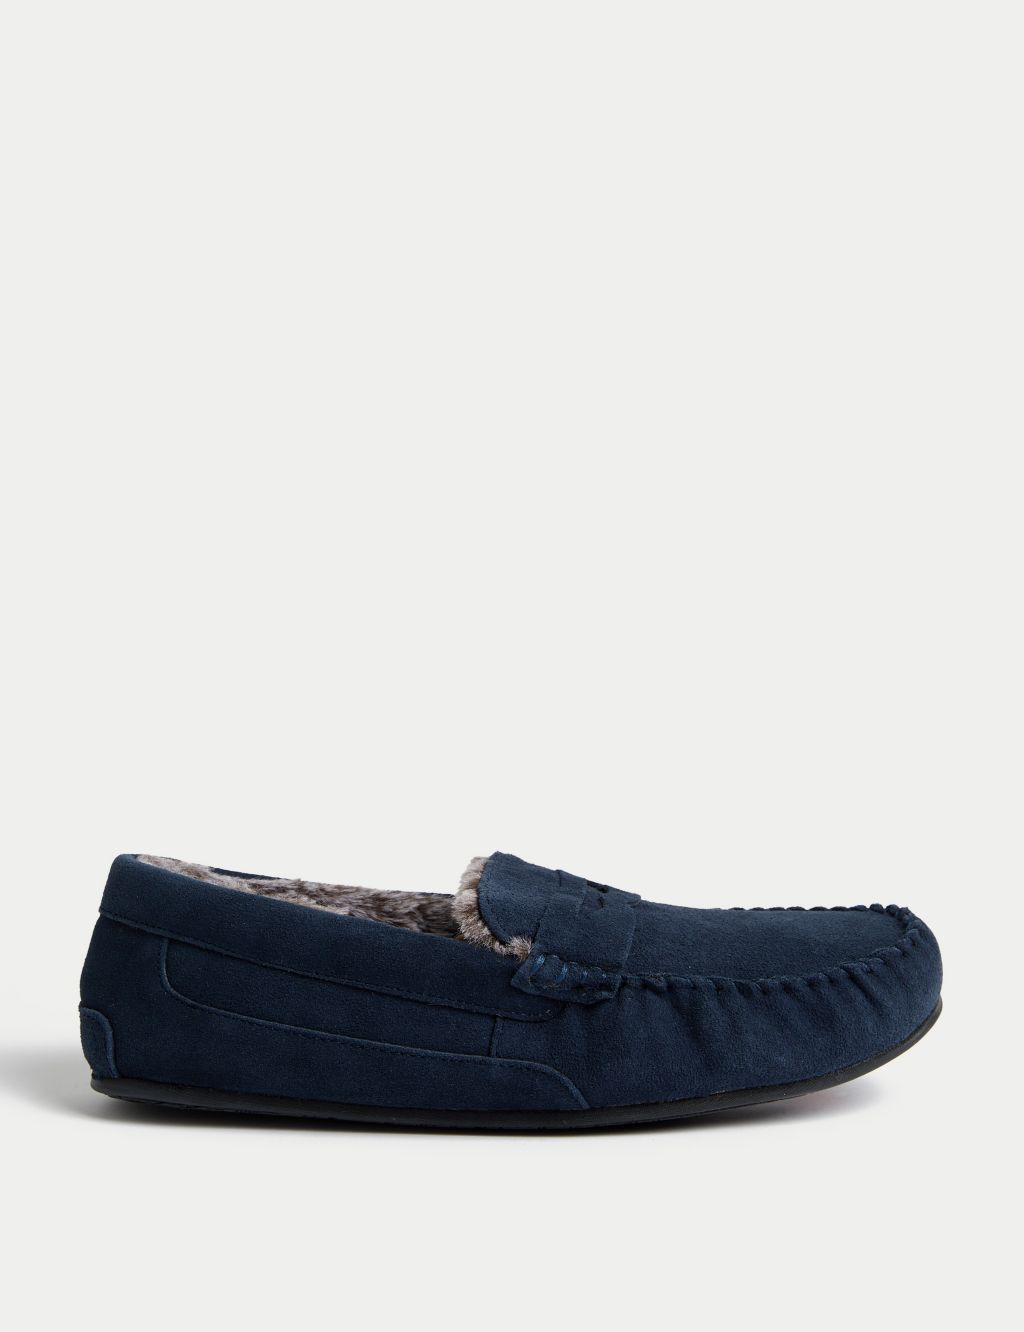 Suede Slippers with Freshfeet™ image 1